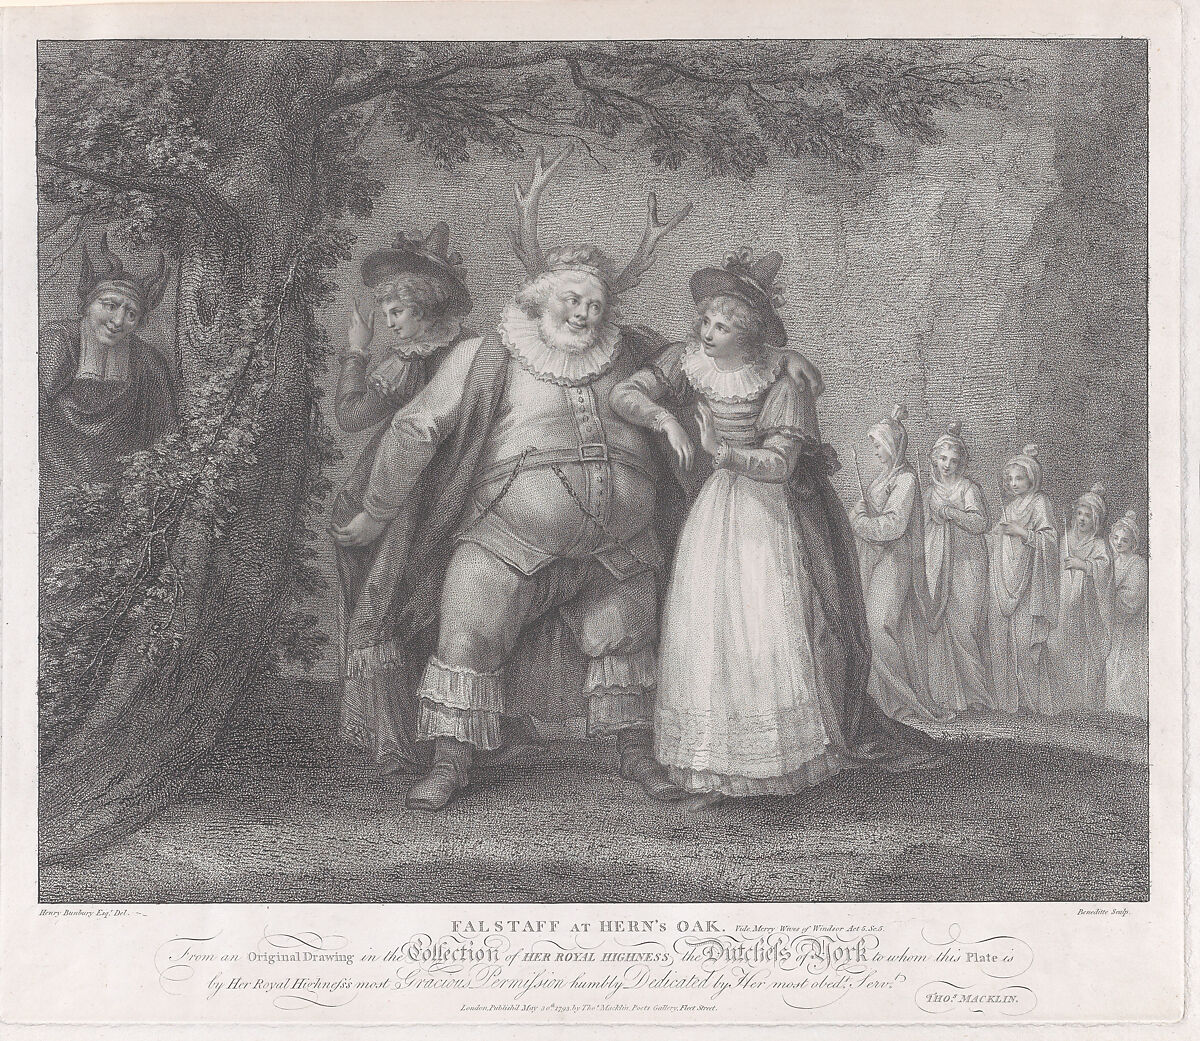 Falstaff at Herne's Oak (Shakespeare, Merry Wives of Windsor, Act 5, Scene 5), Michele Beneditti (British, 1745–1810 Vienna), Stipple engraving and etching 